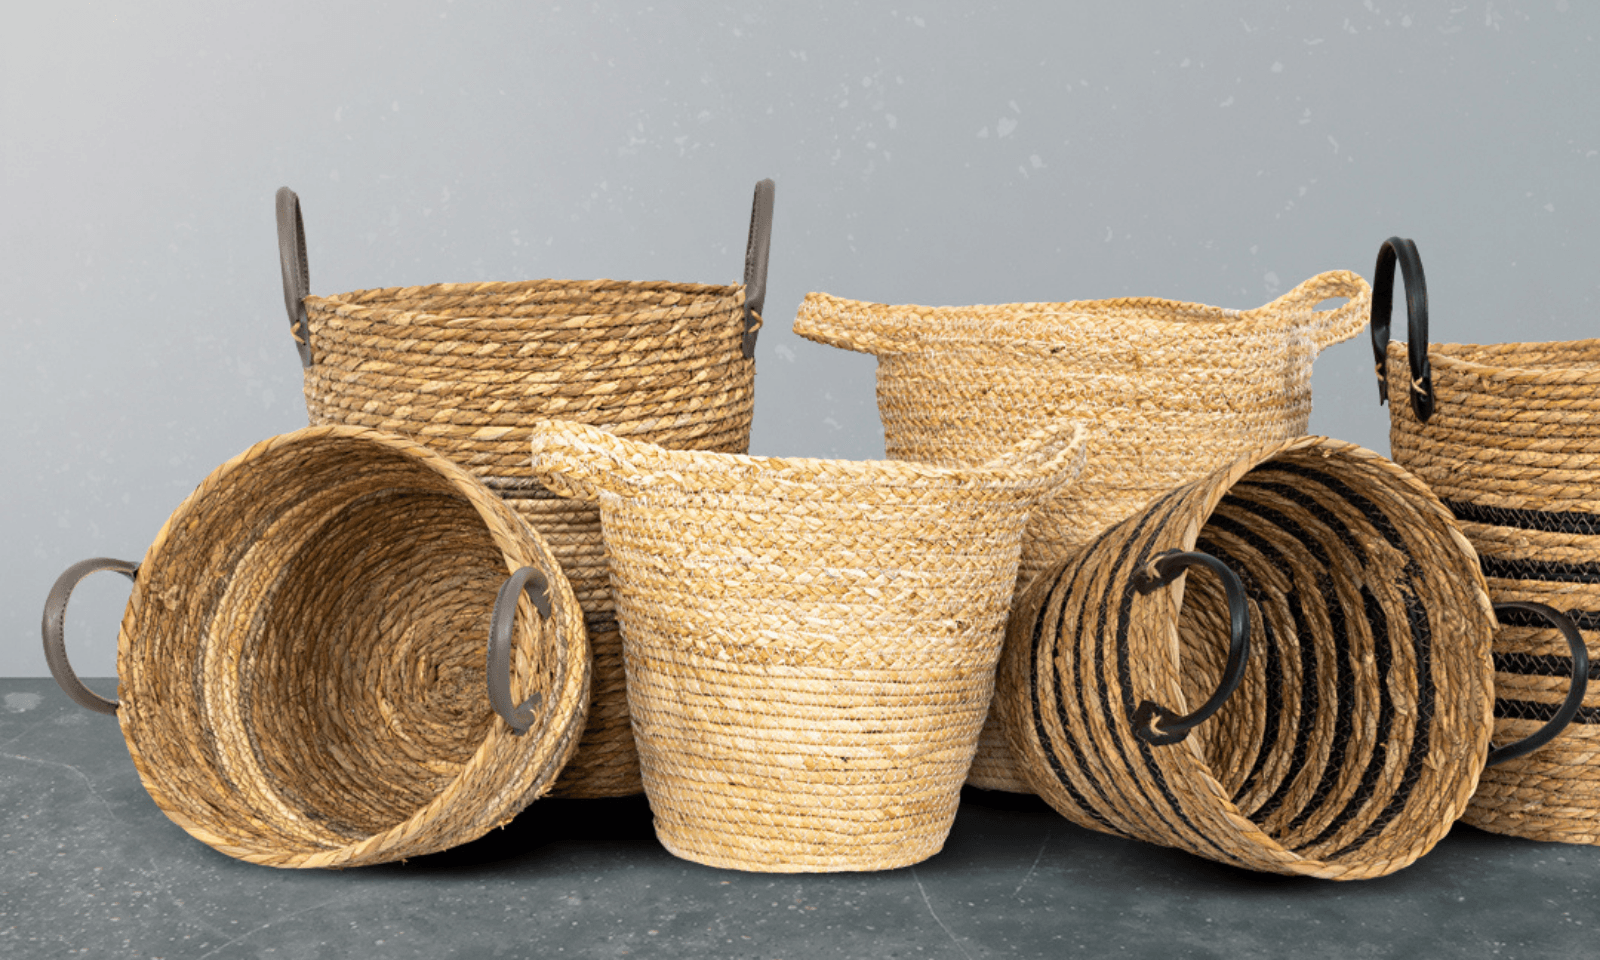 HOW TO USE BASKETS AS STORAGE